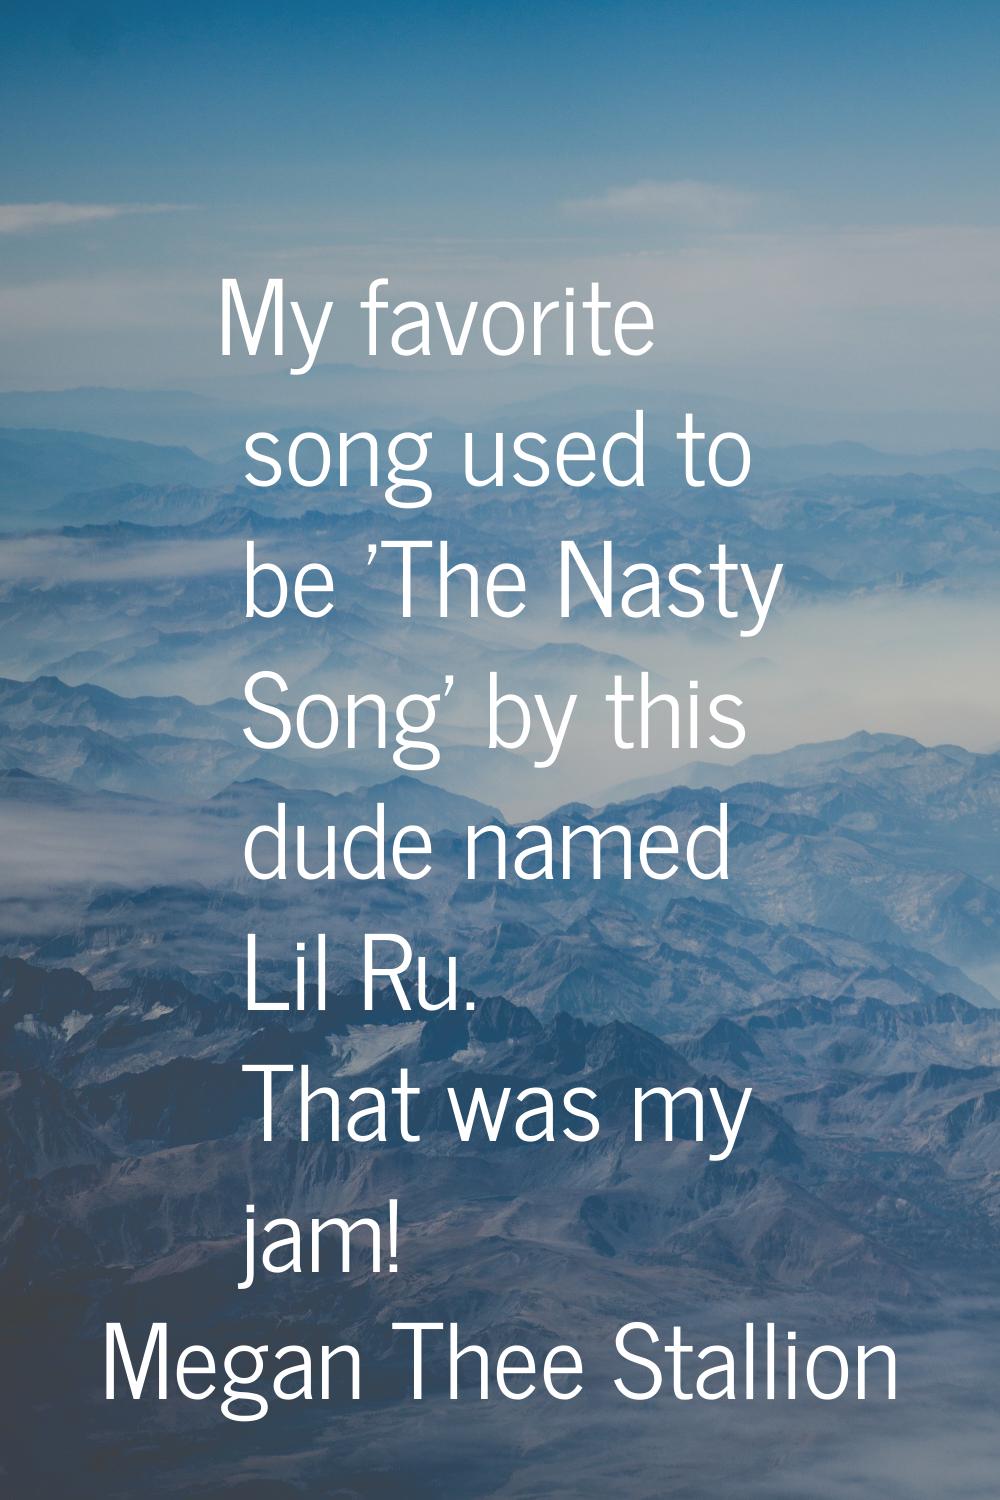 My favorite song used to be 'The Nasty Song' by this dude named Lil Ru. That was my jam!